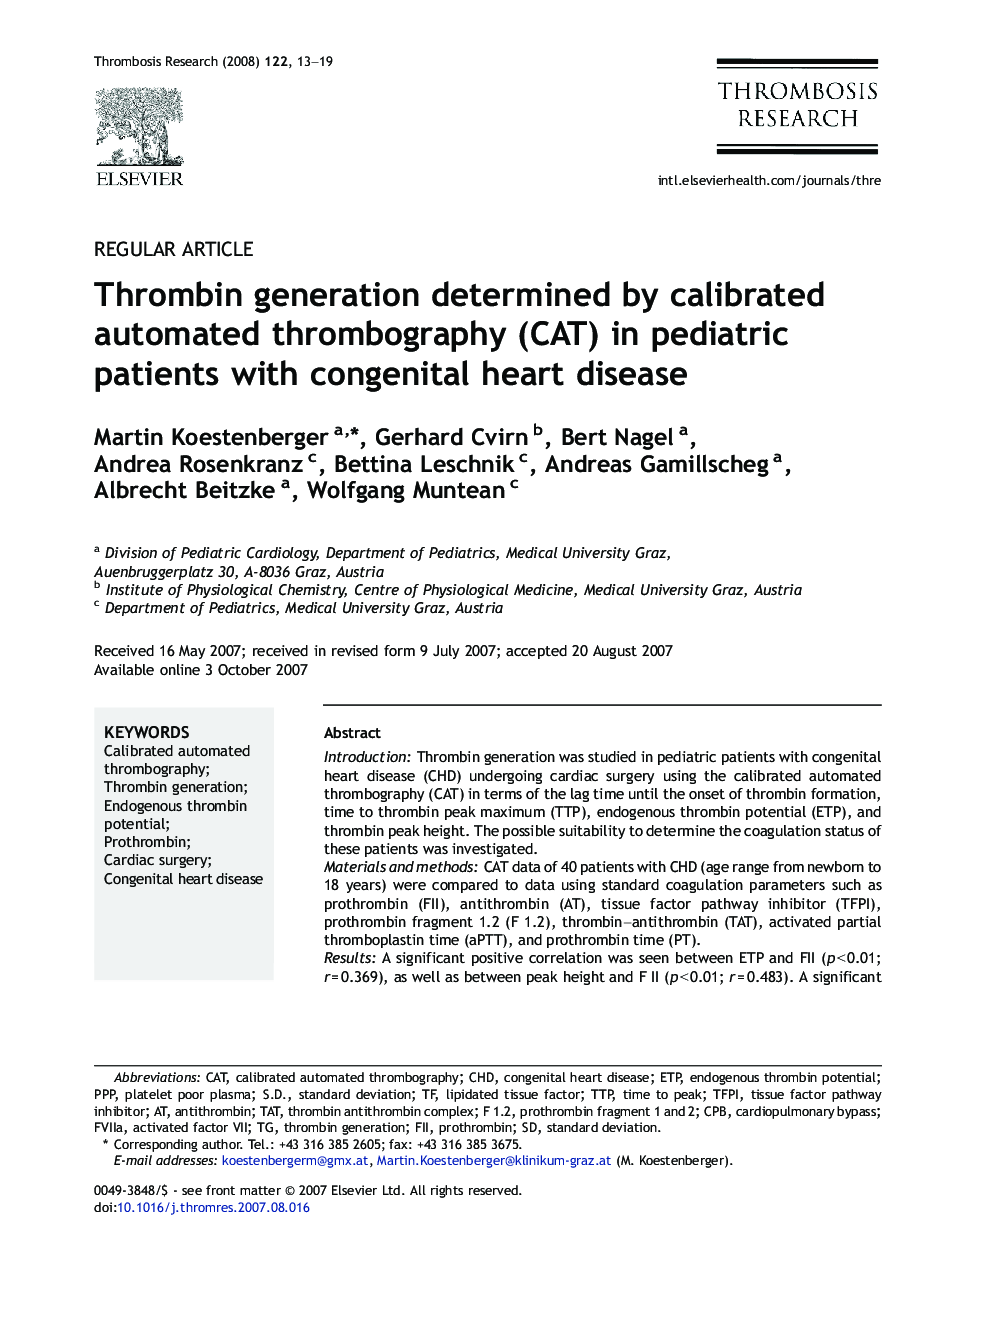 Thrombin generation determined by calibrated automated thrombography (CAT) in pediatric patients with congenital heart disease